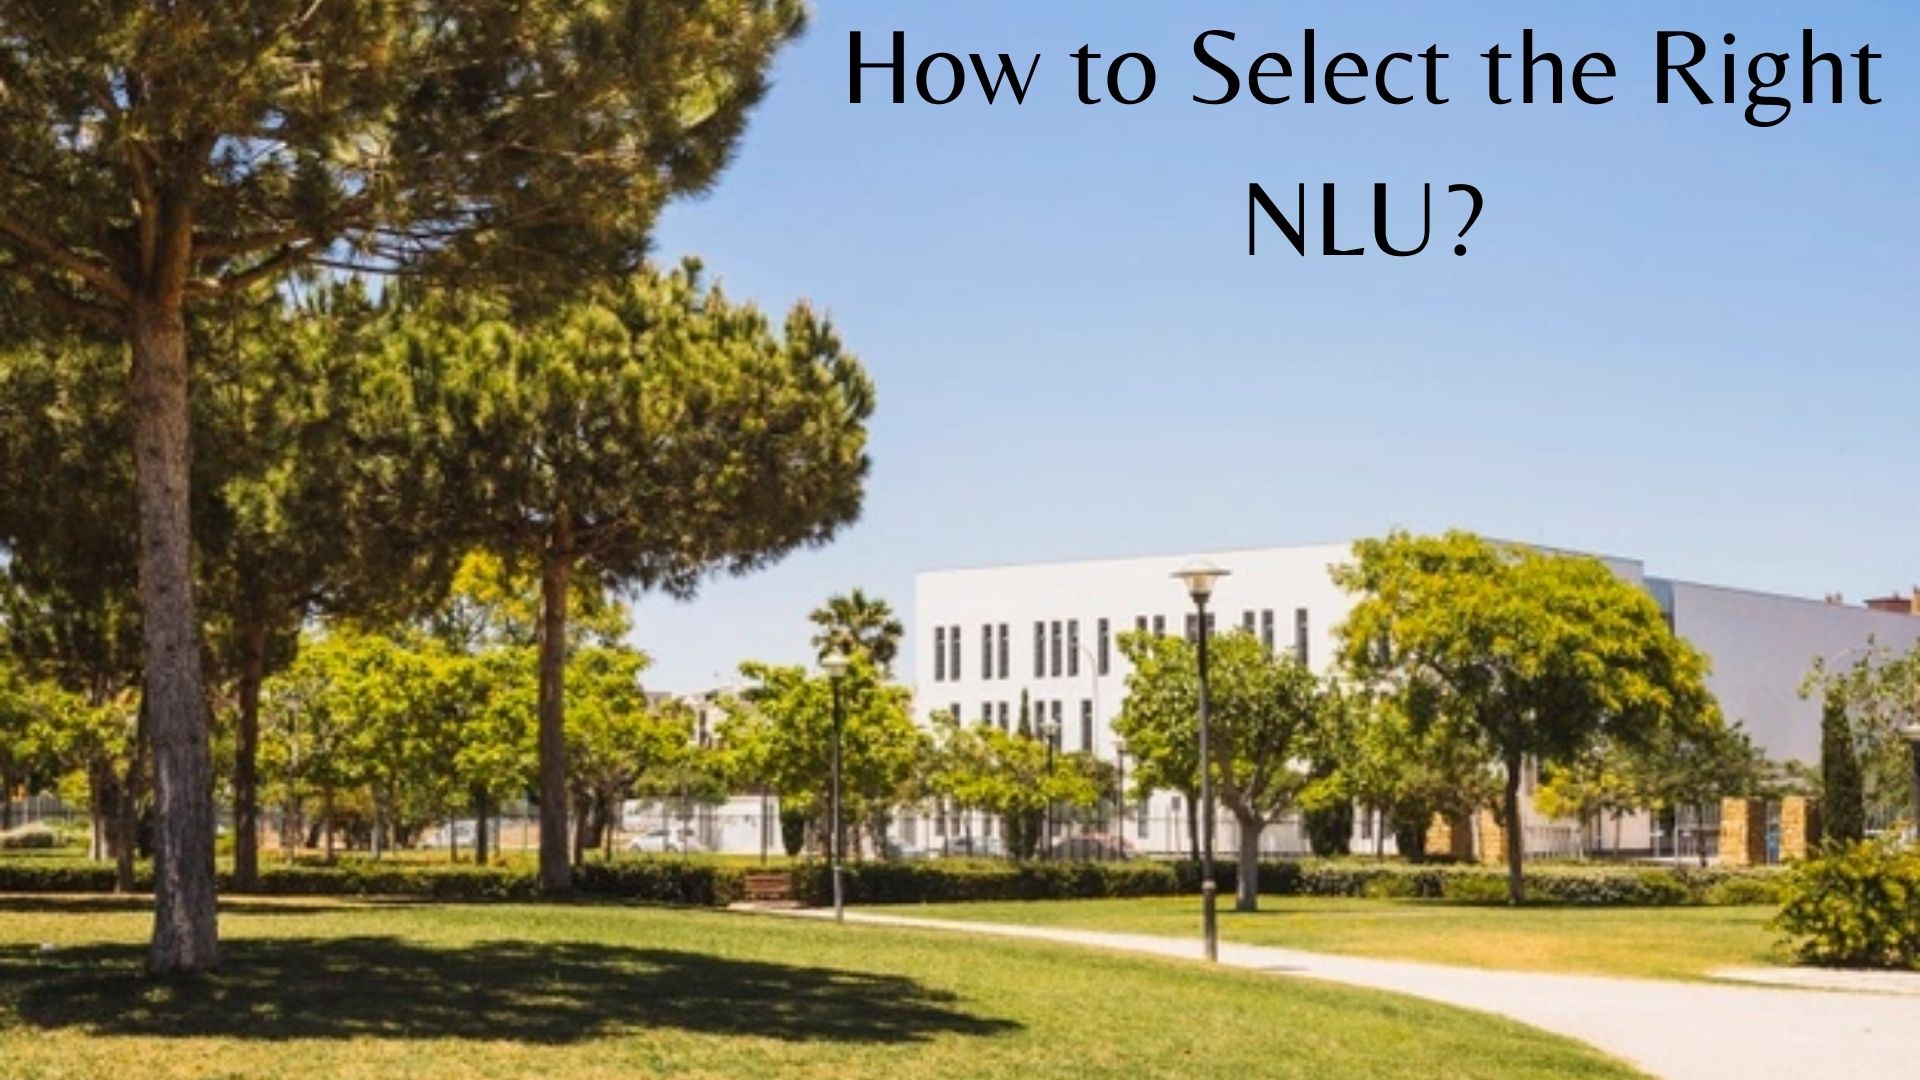 Parameters to Select the Right NLU